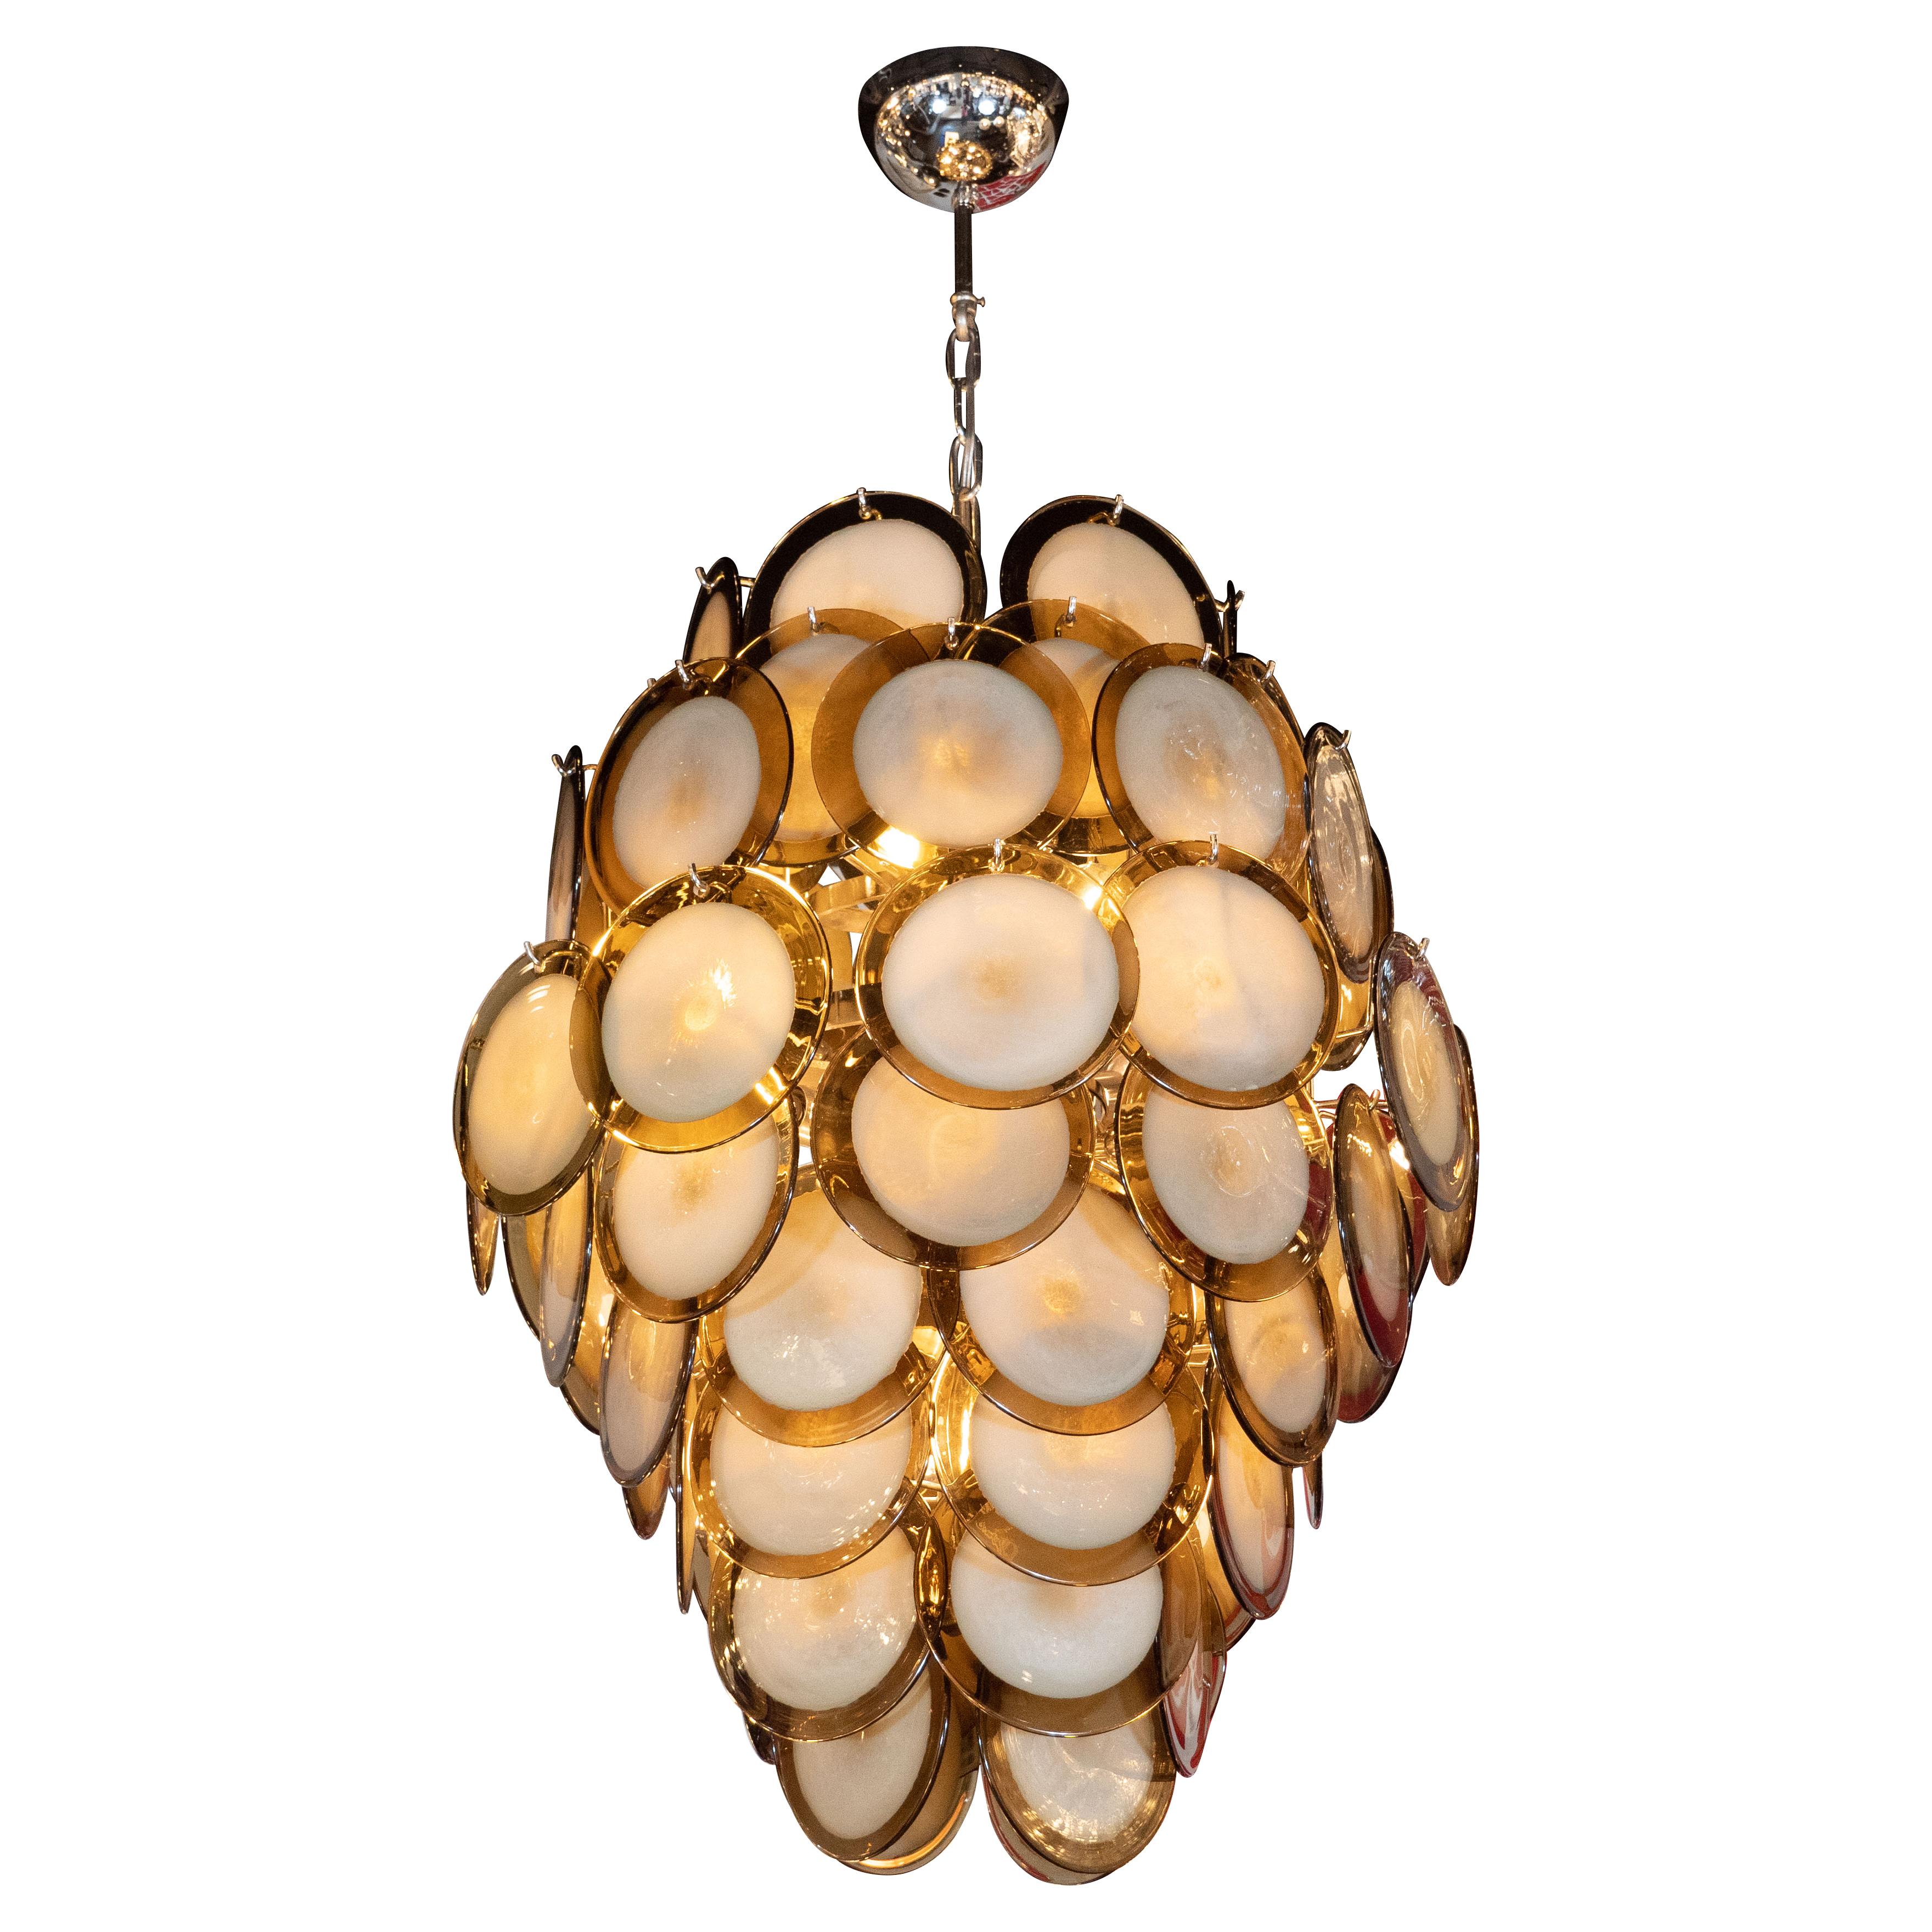 This stunning modernist chandelier was realized by our atelier in Murano, Italy- the island off the coast of Venice renowned for centuries for its superlative glass production- exclusively for us. It features a pagoda form composed of an abundance